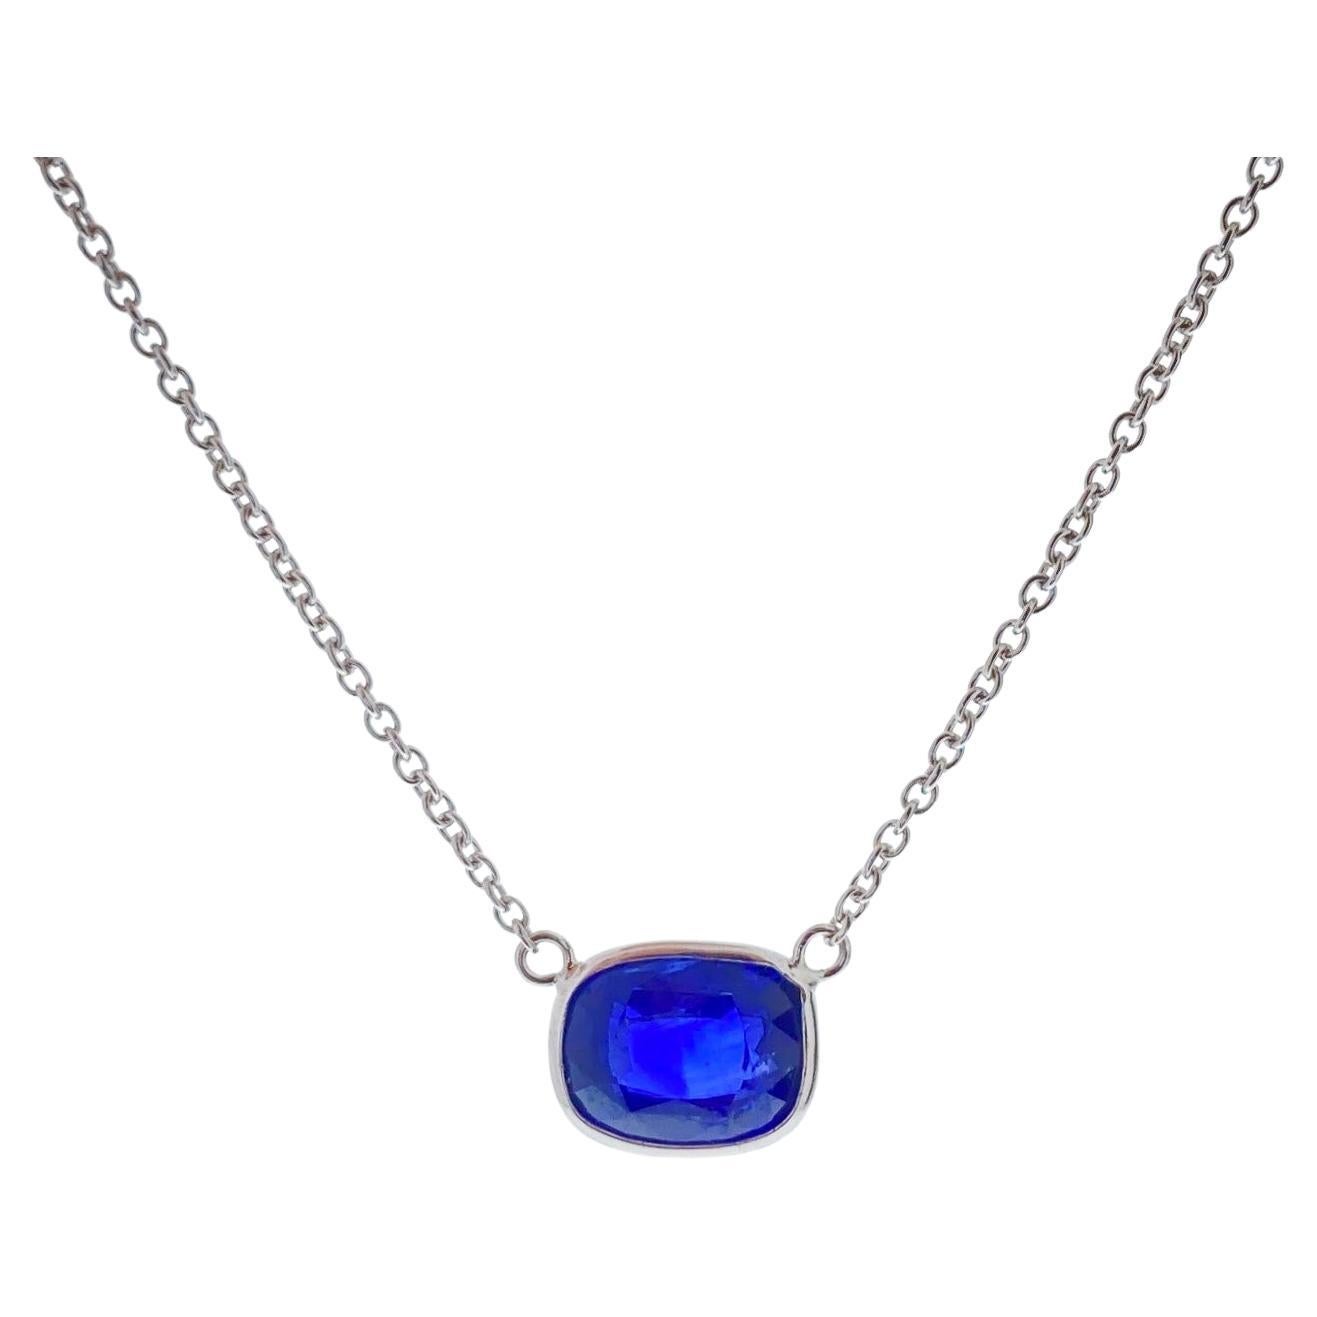 2.64 Carat Cushion Blue Sapphire Fashion Necklaces In 14K White Gold  For Sale